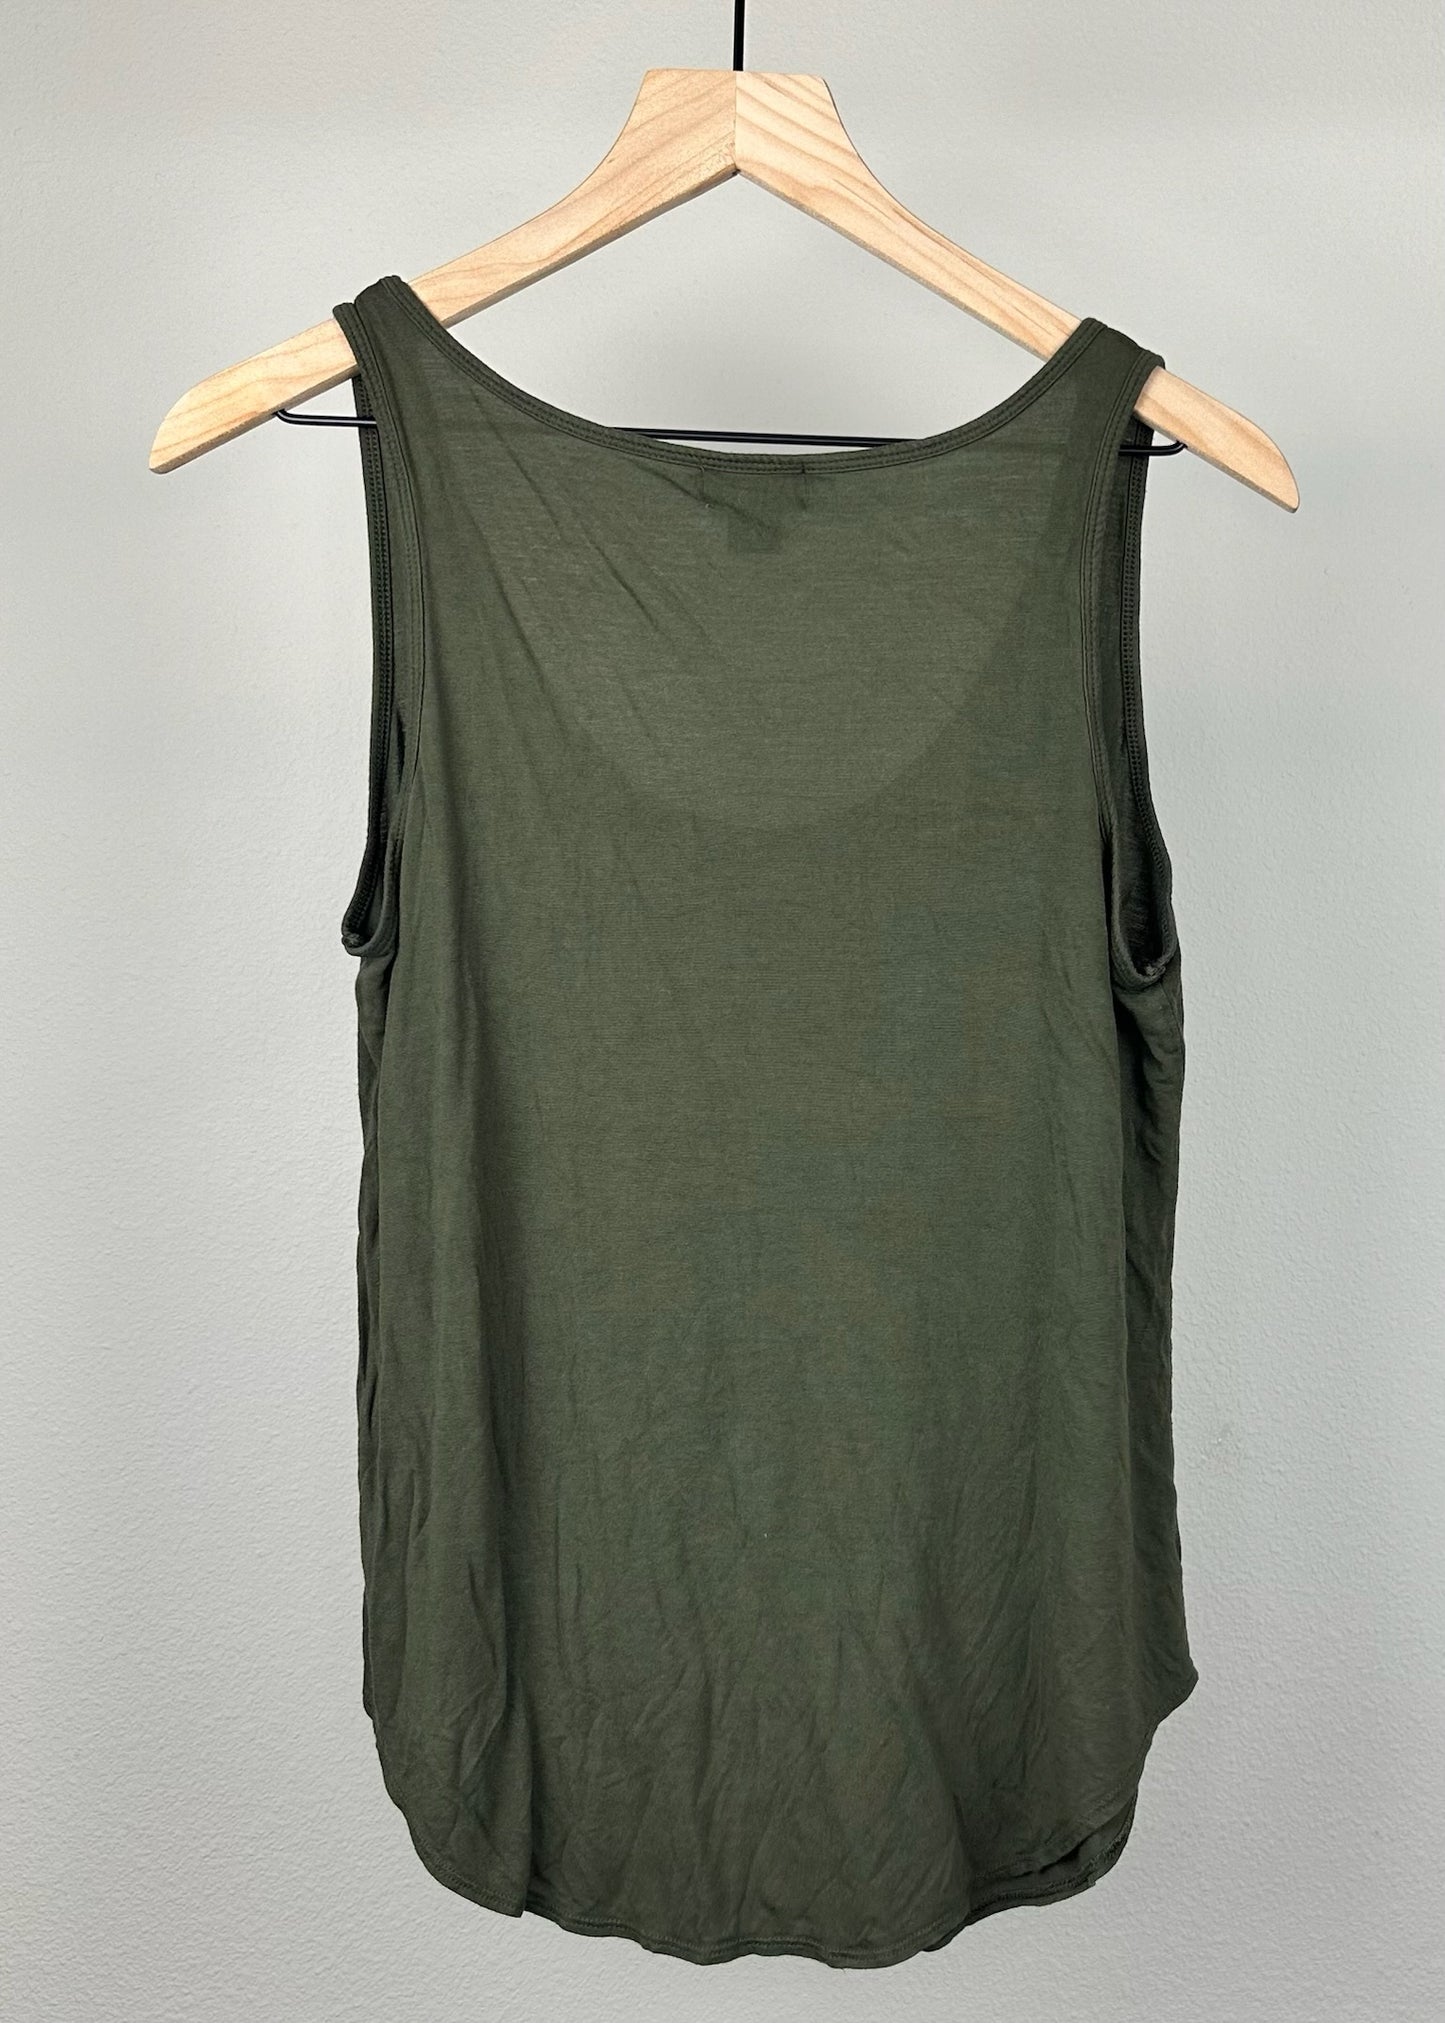 Green Tank Top by Old Navy